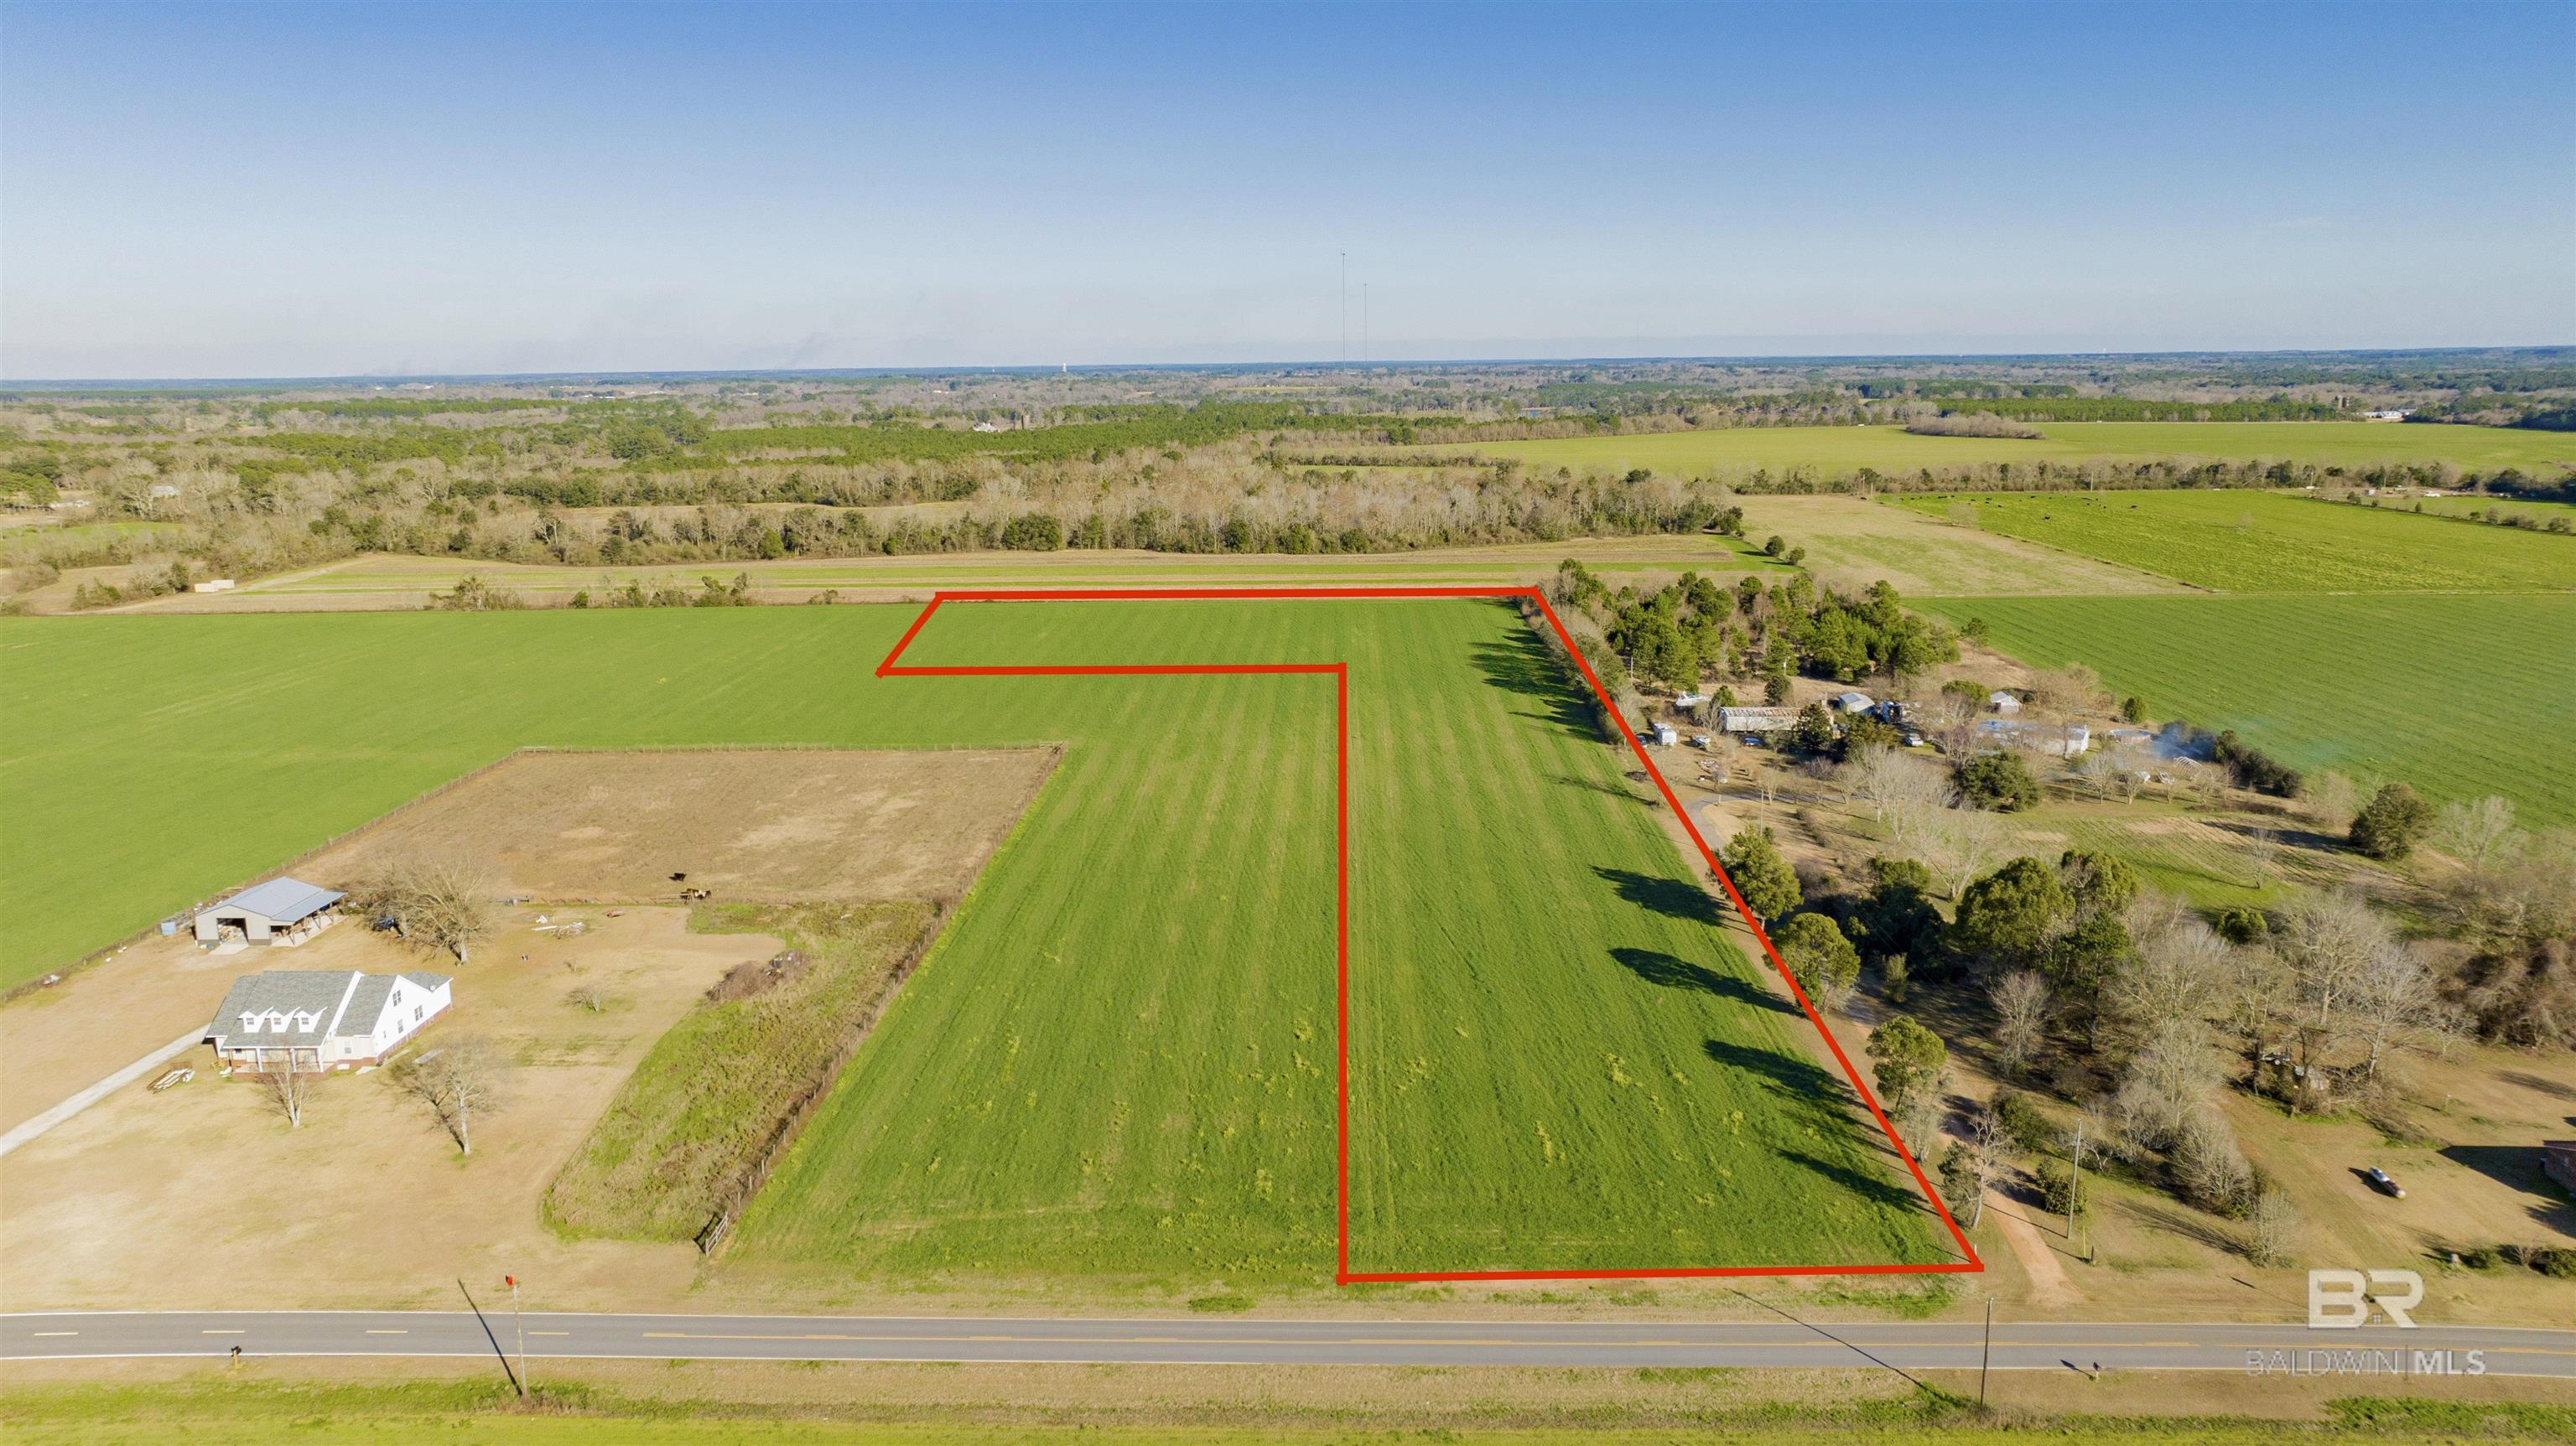 7.5 Acres of beautiful land located in Loxley. Currently farmed, but ready to be transformed into an excellent spacious homesite. 2200 square foot minimum home is required per deed restriction.